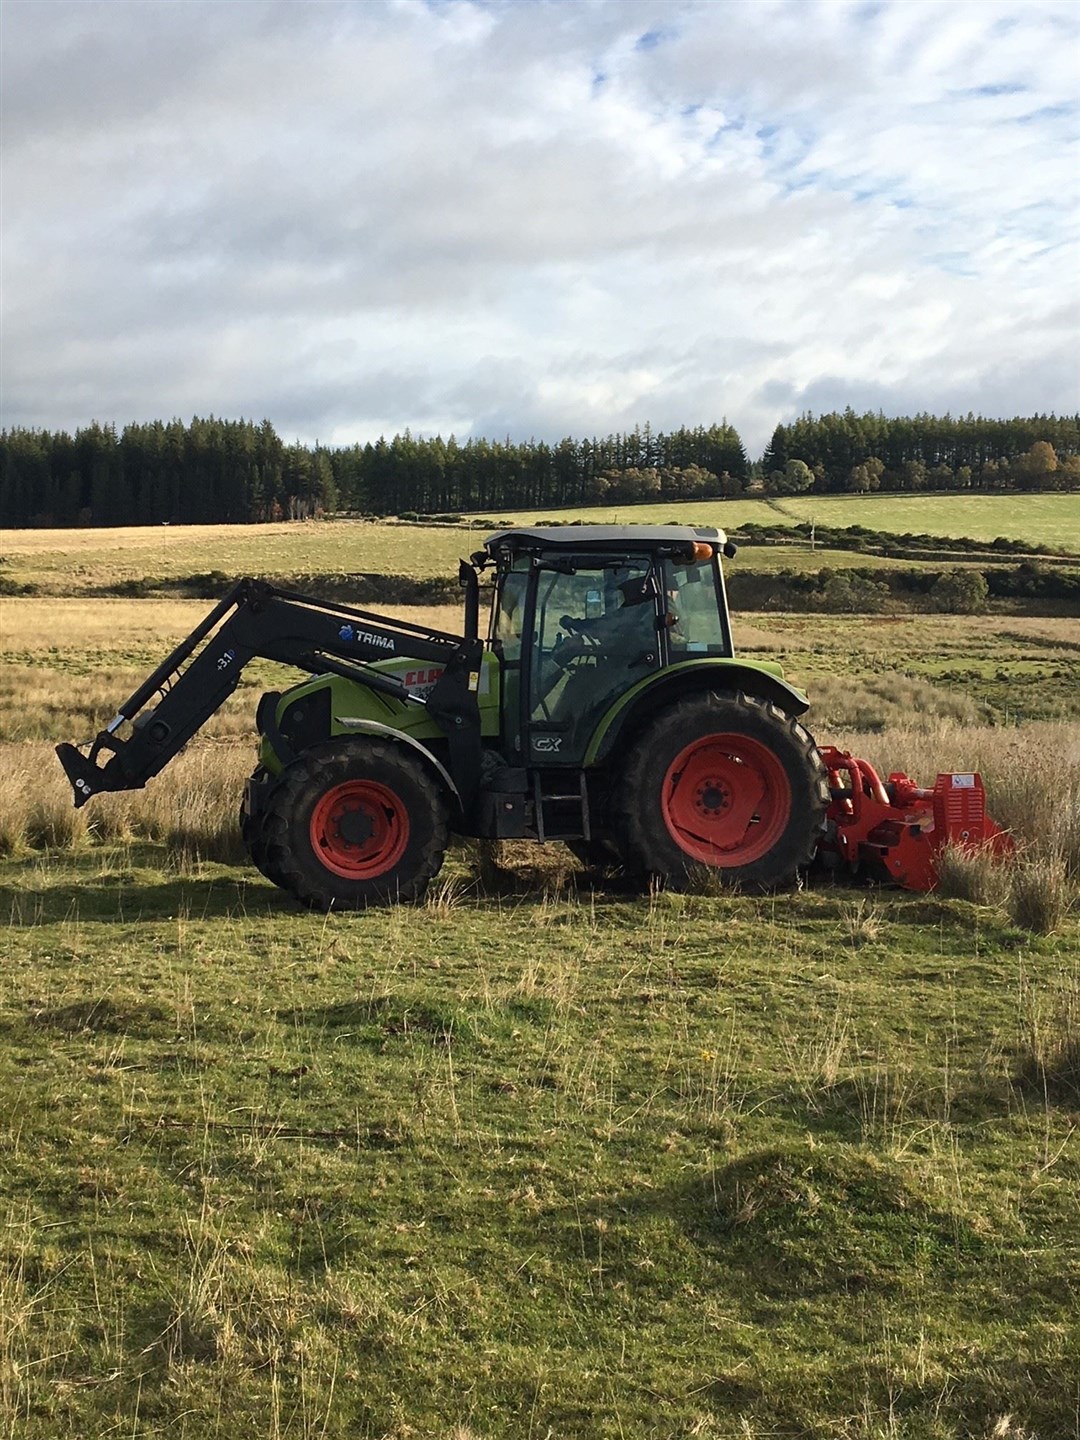 Equipment is available to hire for land managers in Glenlivet and Tomintoul.